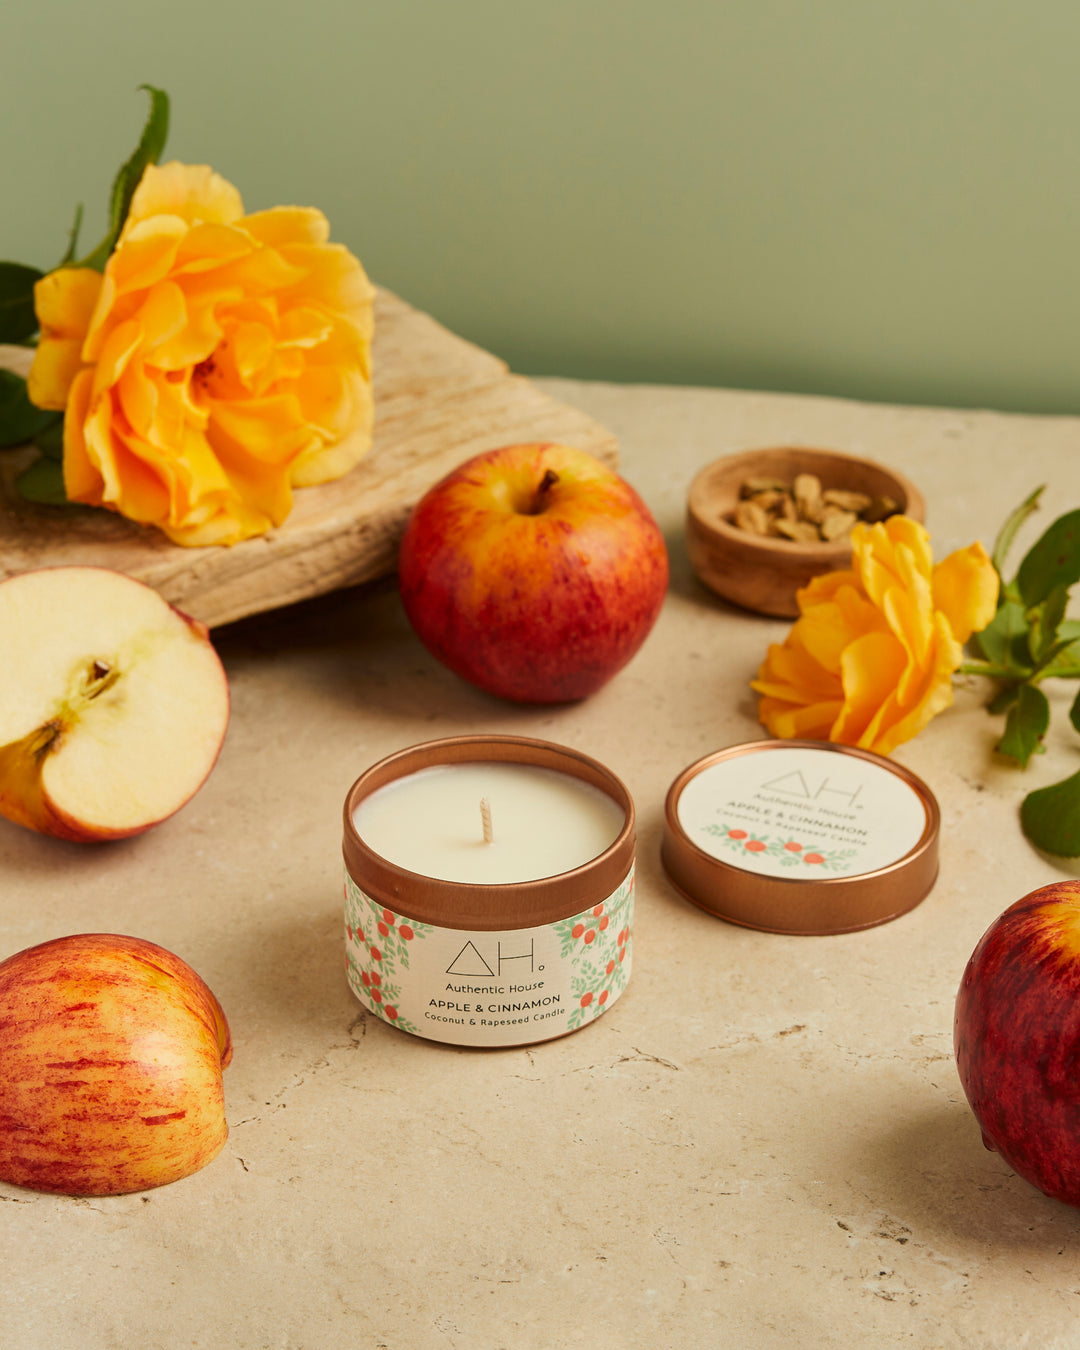 Apple & cinnamon coconut rapeseed candle with apples and roses